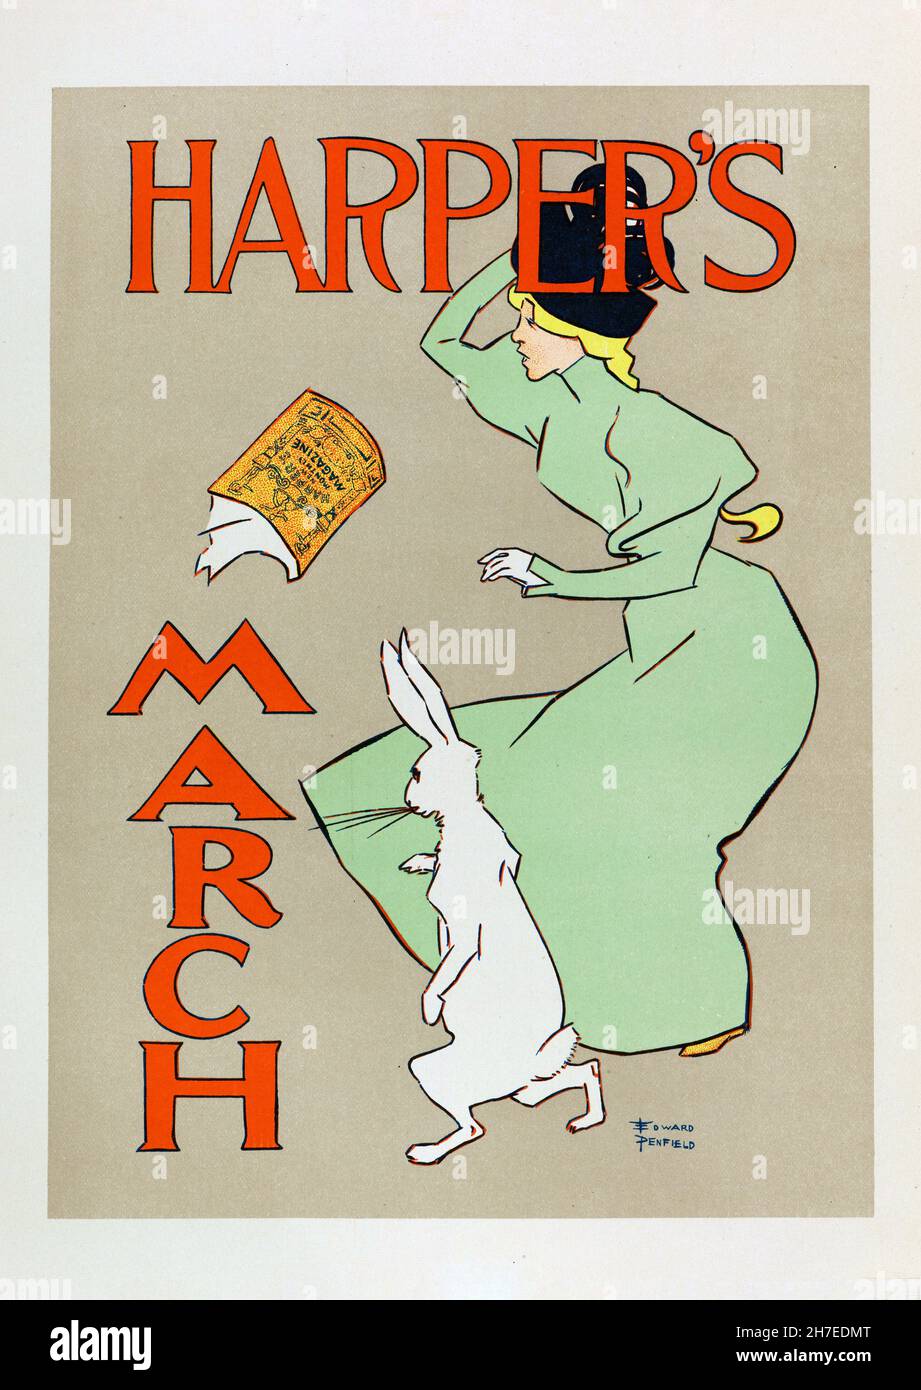 Poster advertising the March issue of Harper’s magazine, 1890s Stock Photo